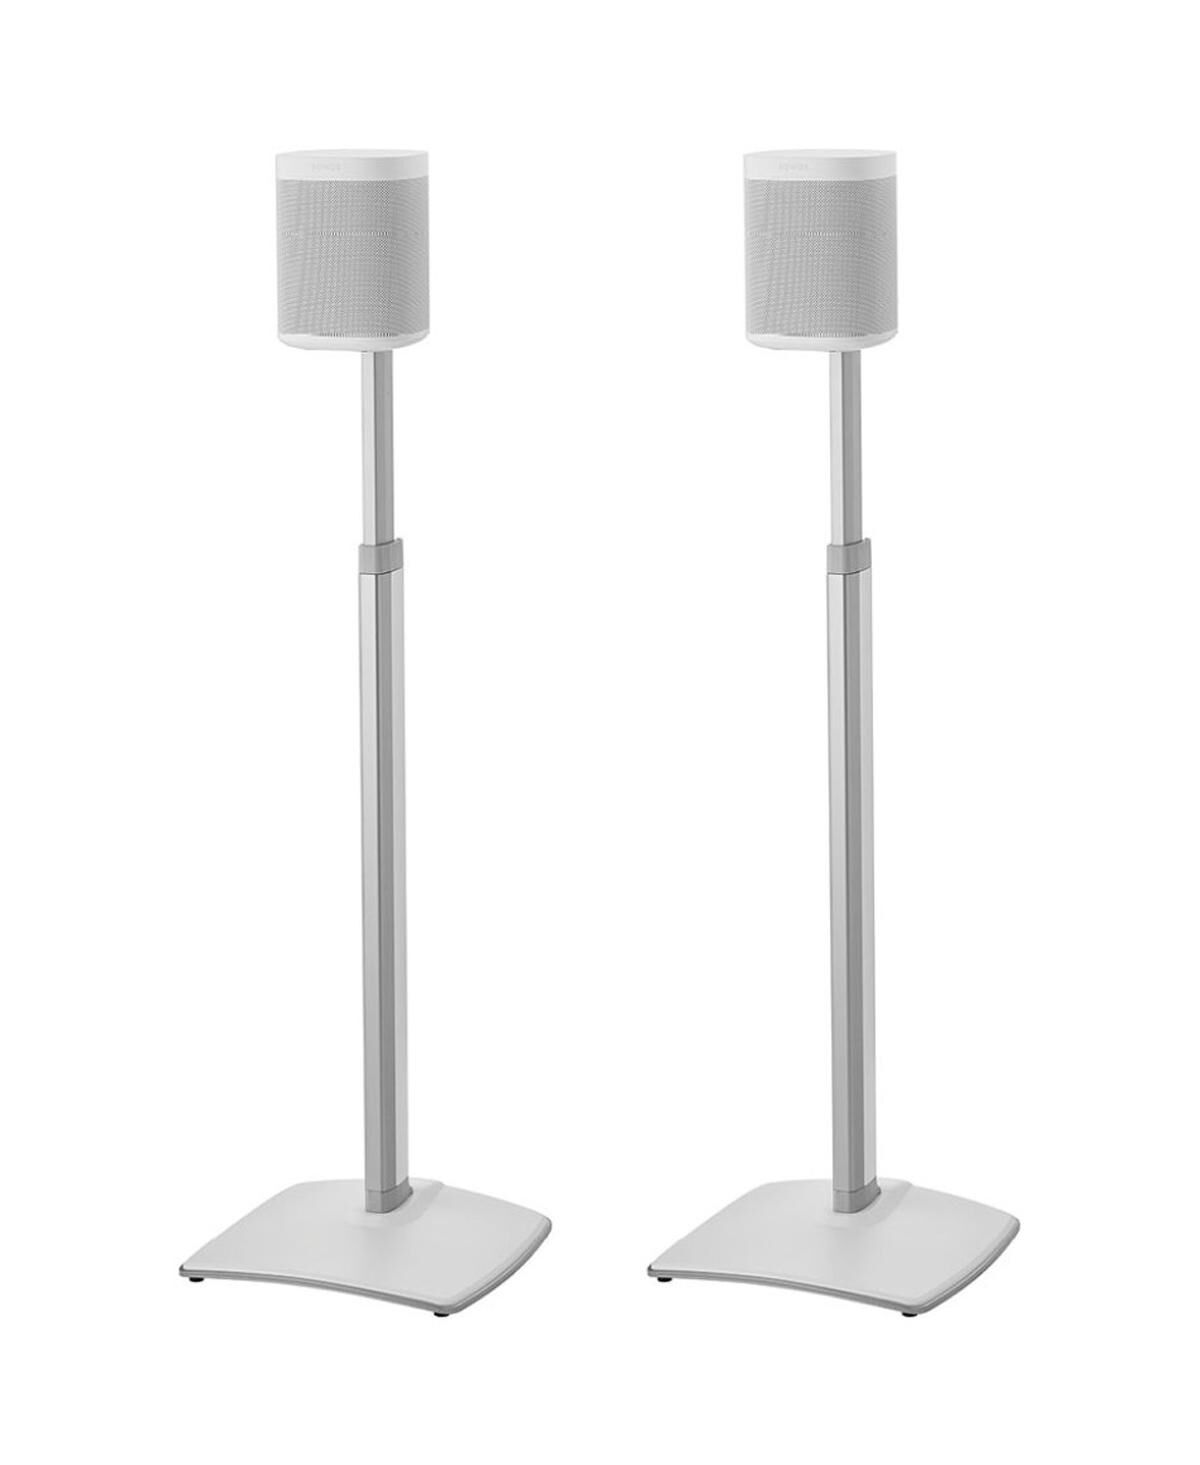 Sanus WSSA2 Adjustable Height Wireless Speaker Stands for Sonos One, Play:1, and Play:3 - Pair - White